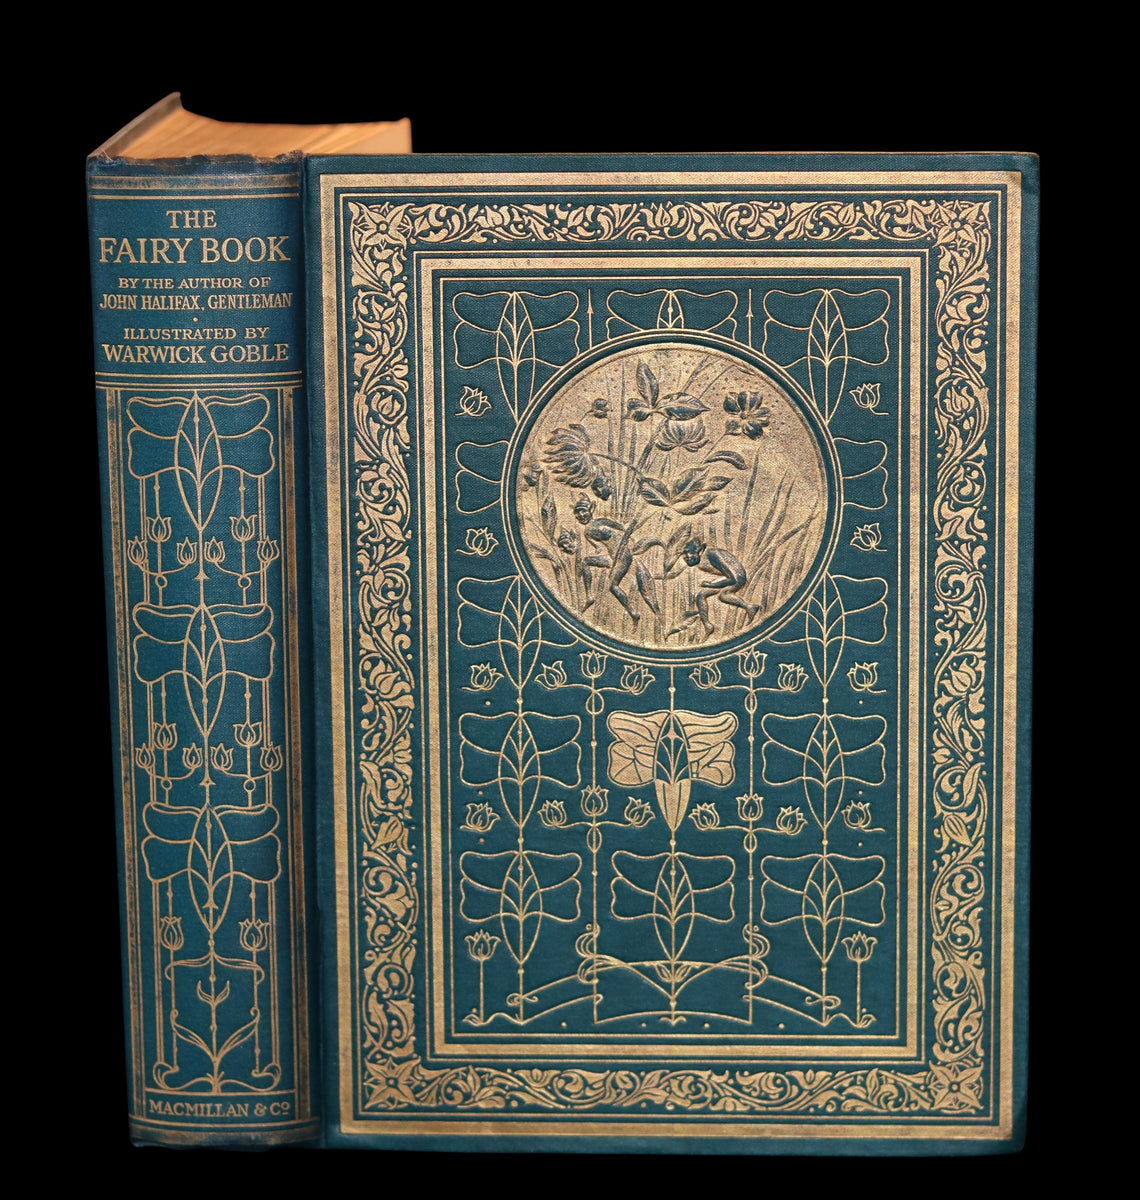 1913 Rare First Edition - THE FAIRY BOOK Illustrated in color by Warwi ...